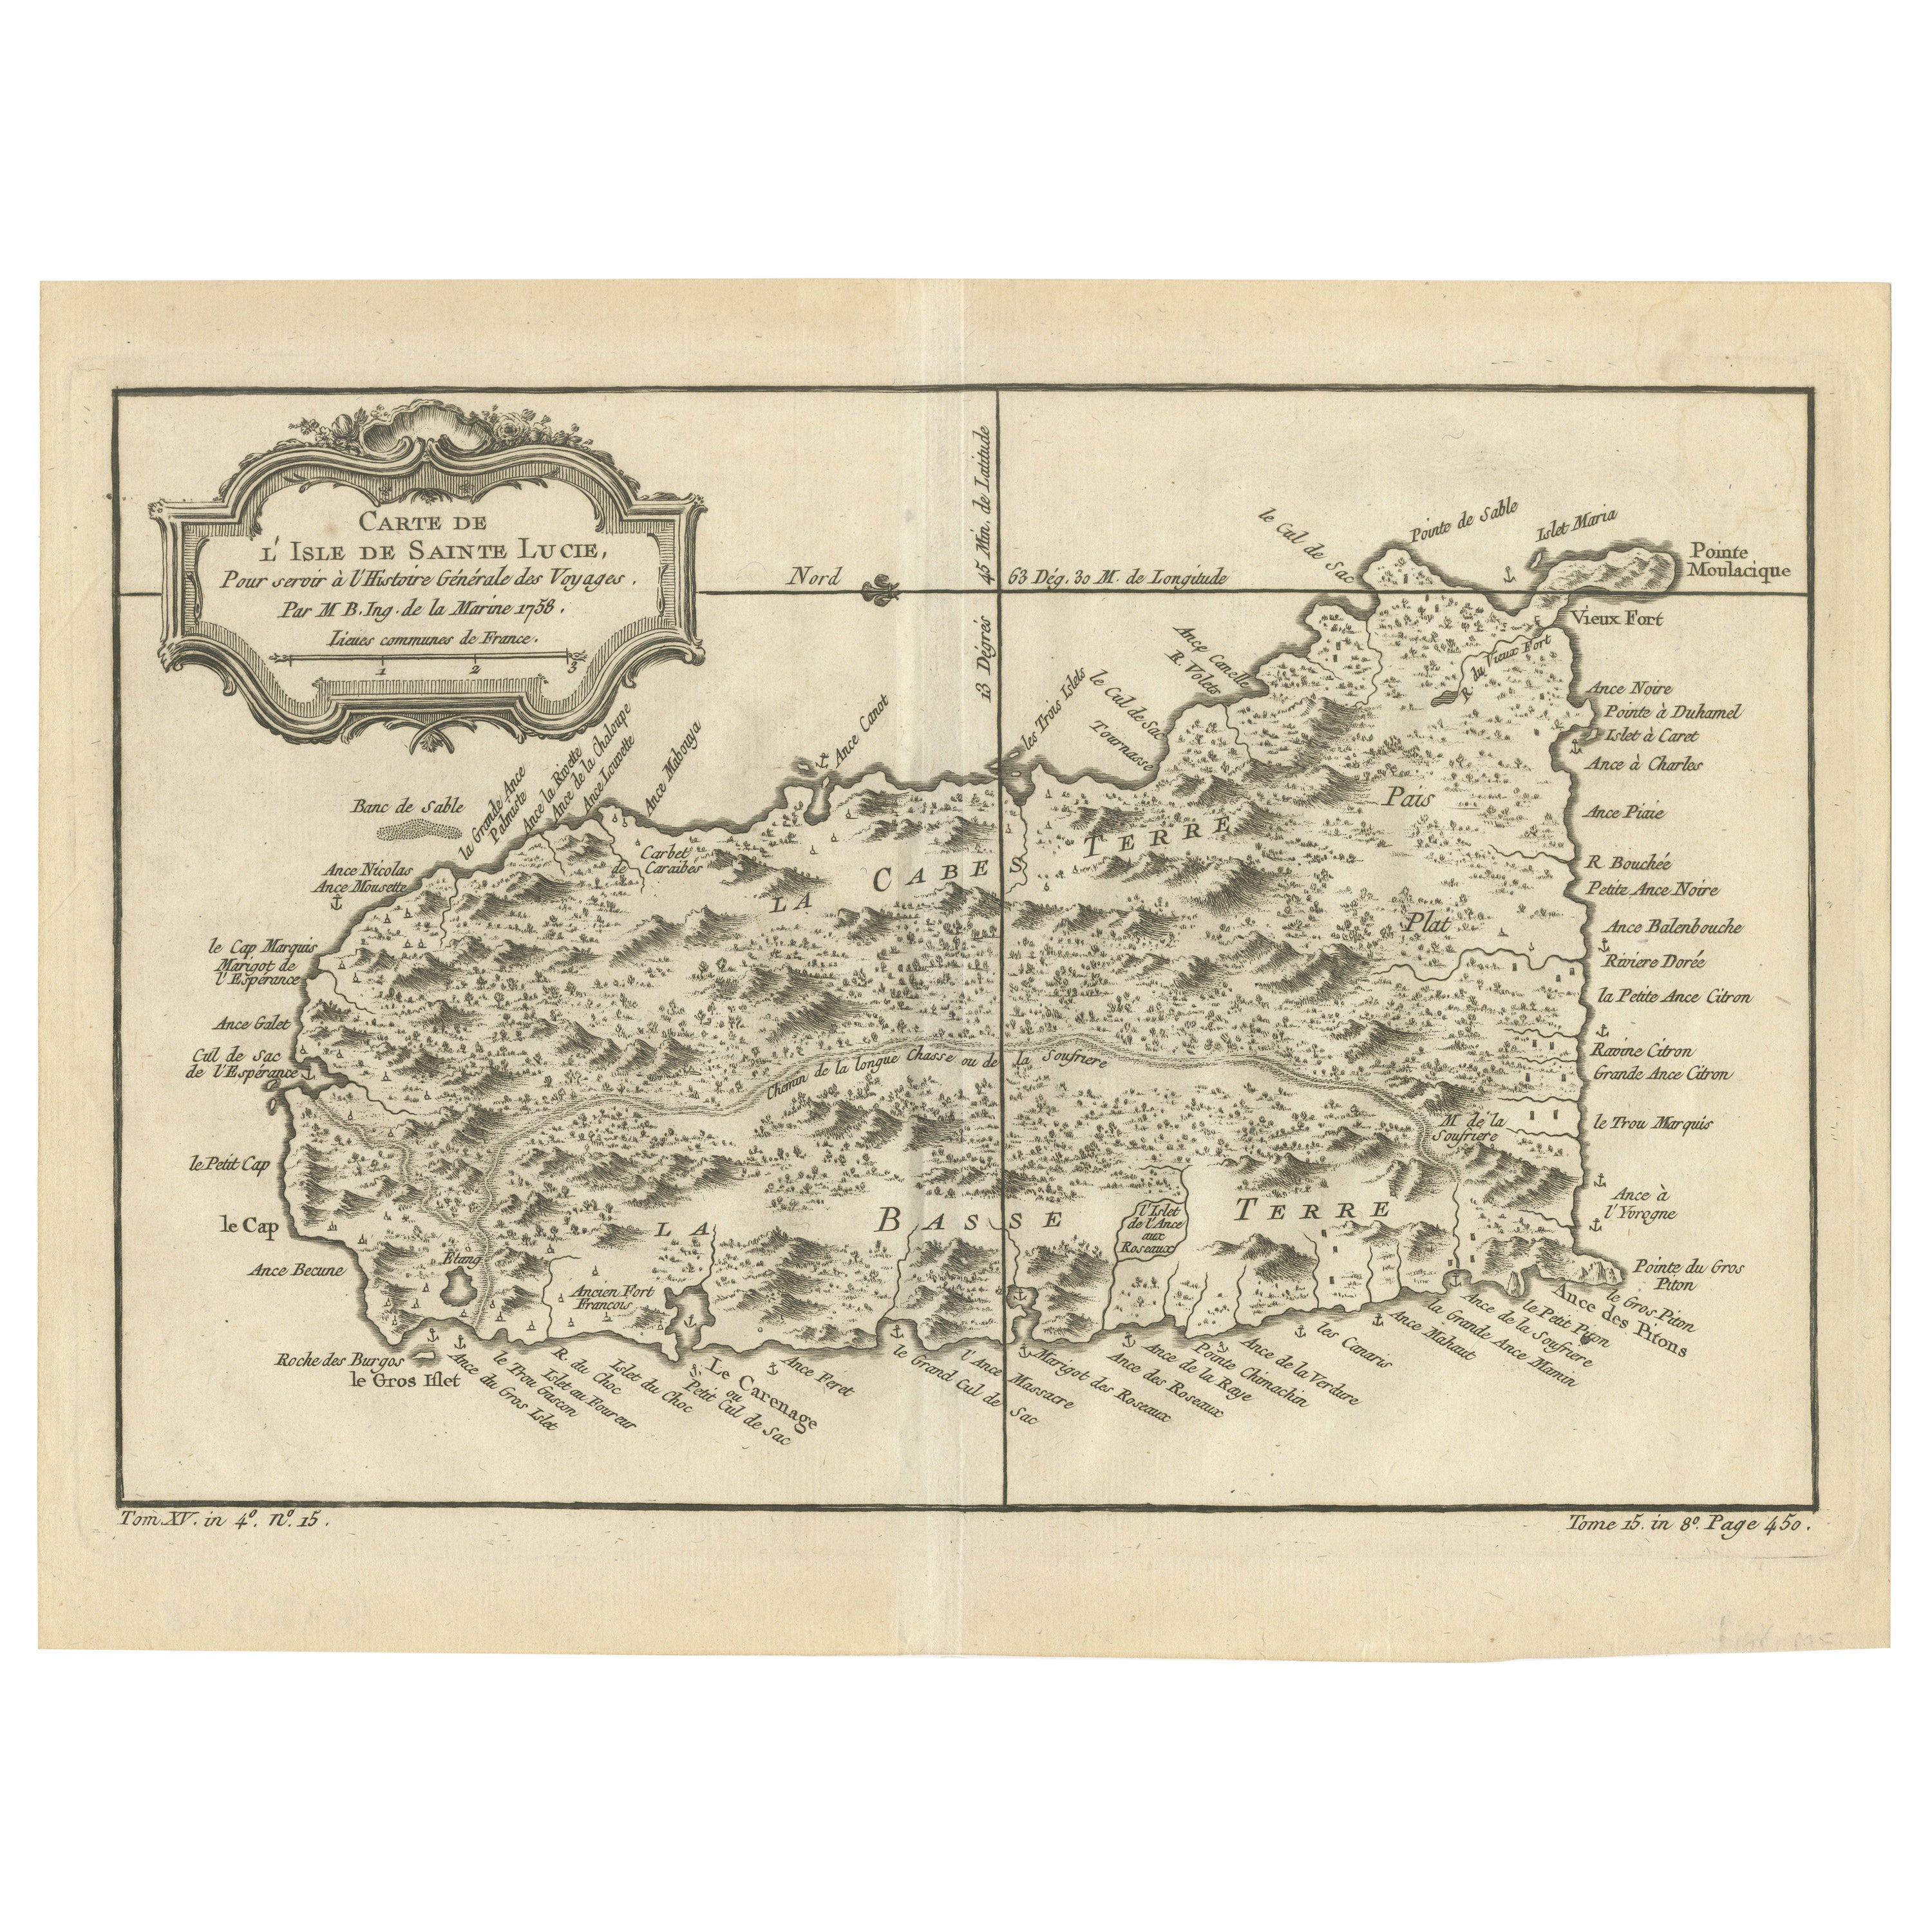 Original Engraved Map of Saint Lucia in the West Indies by Bellin, 1758